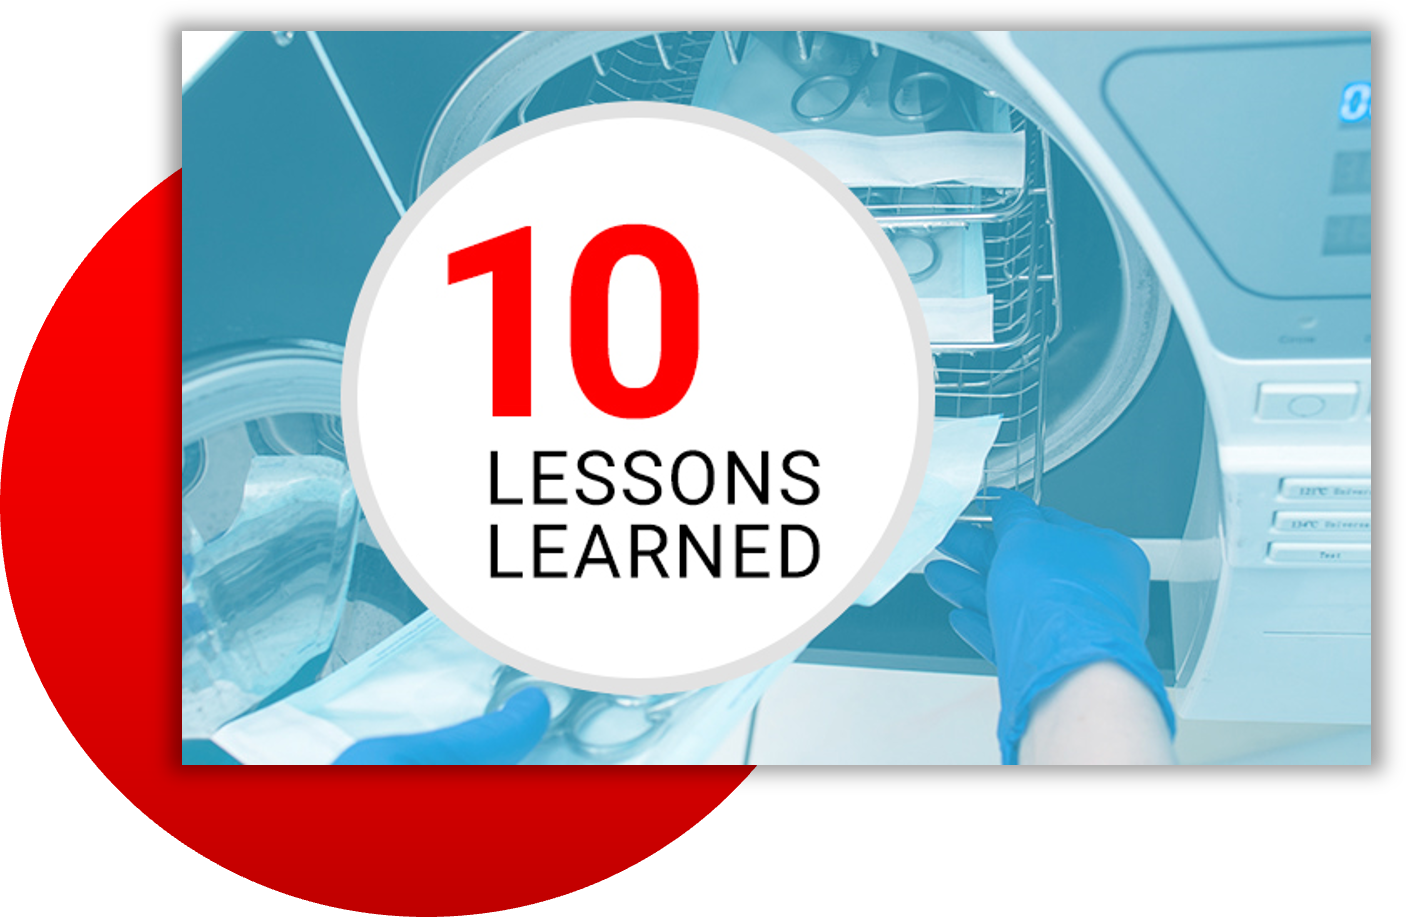 10 lessons learned